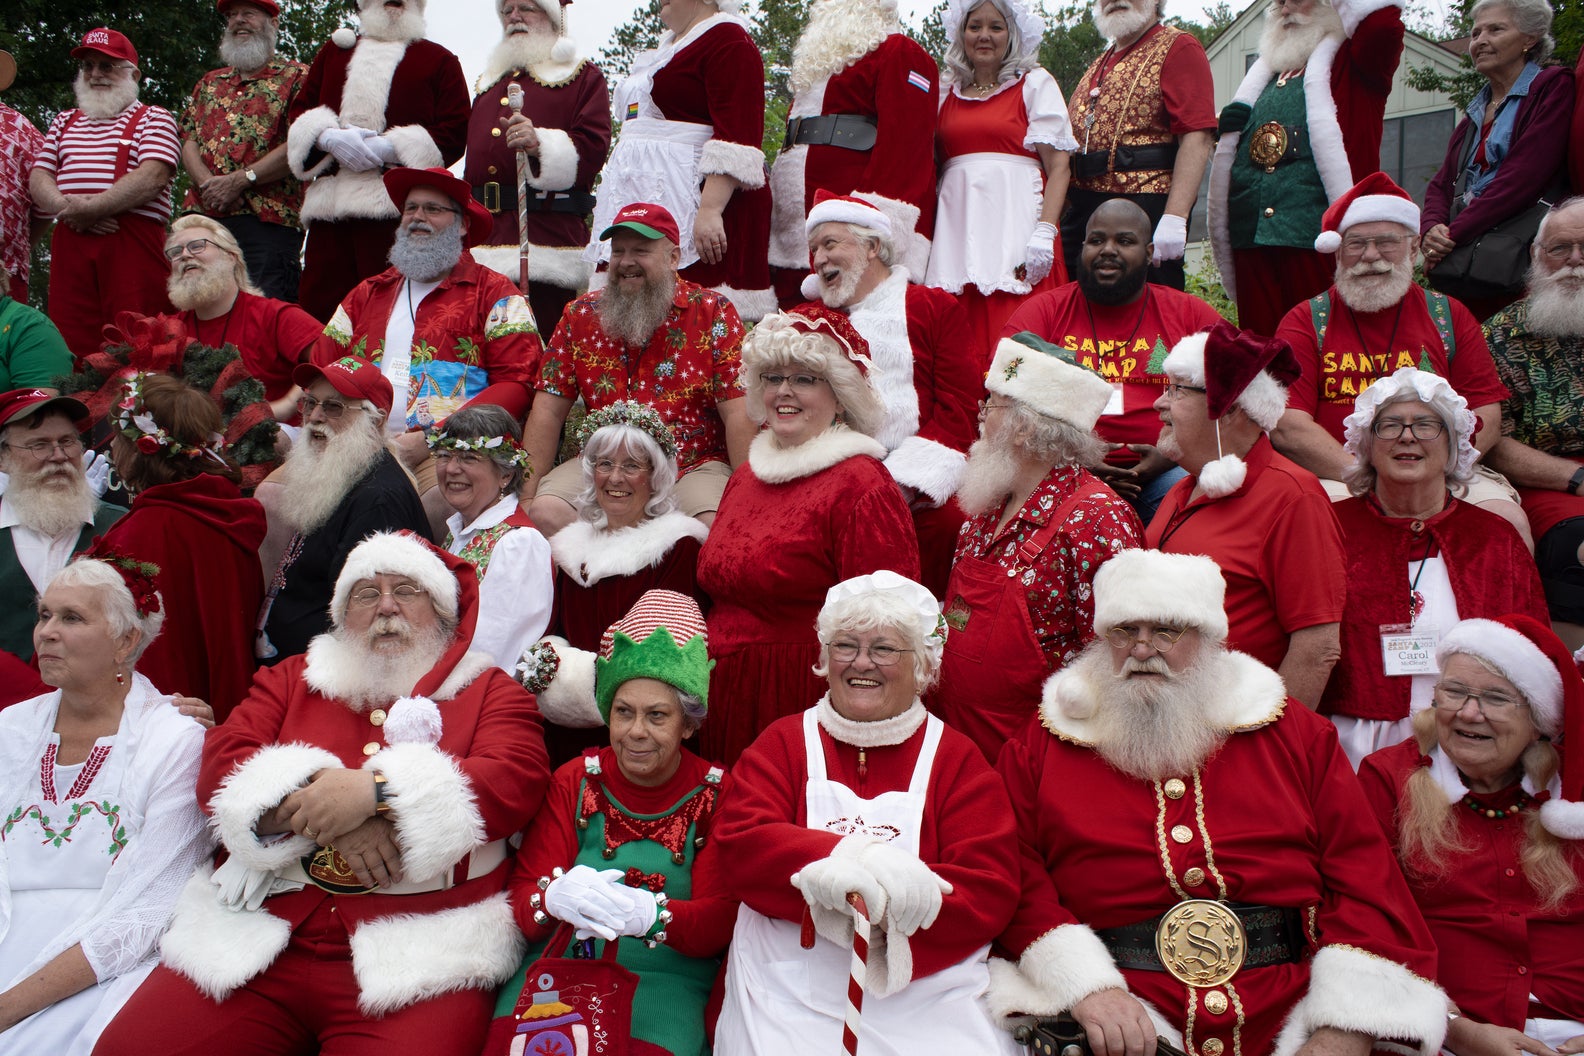 New documentary Santa Camp showcases an annual New England camp for training Santas and Mrs Clauses